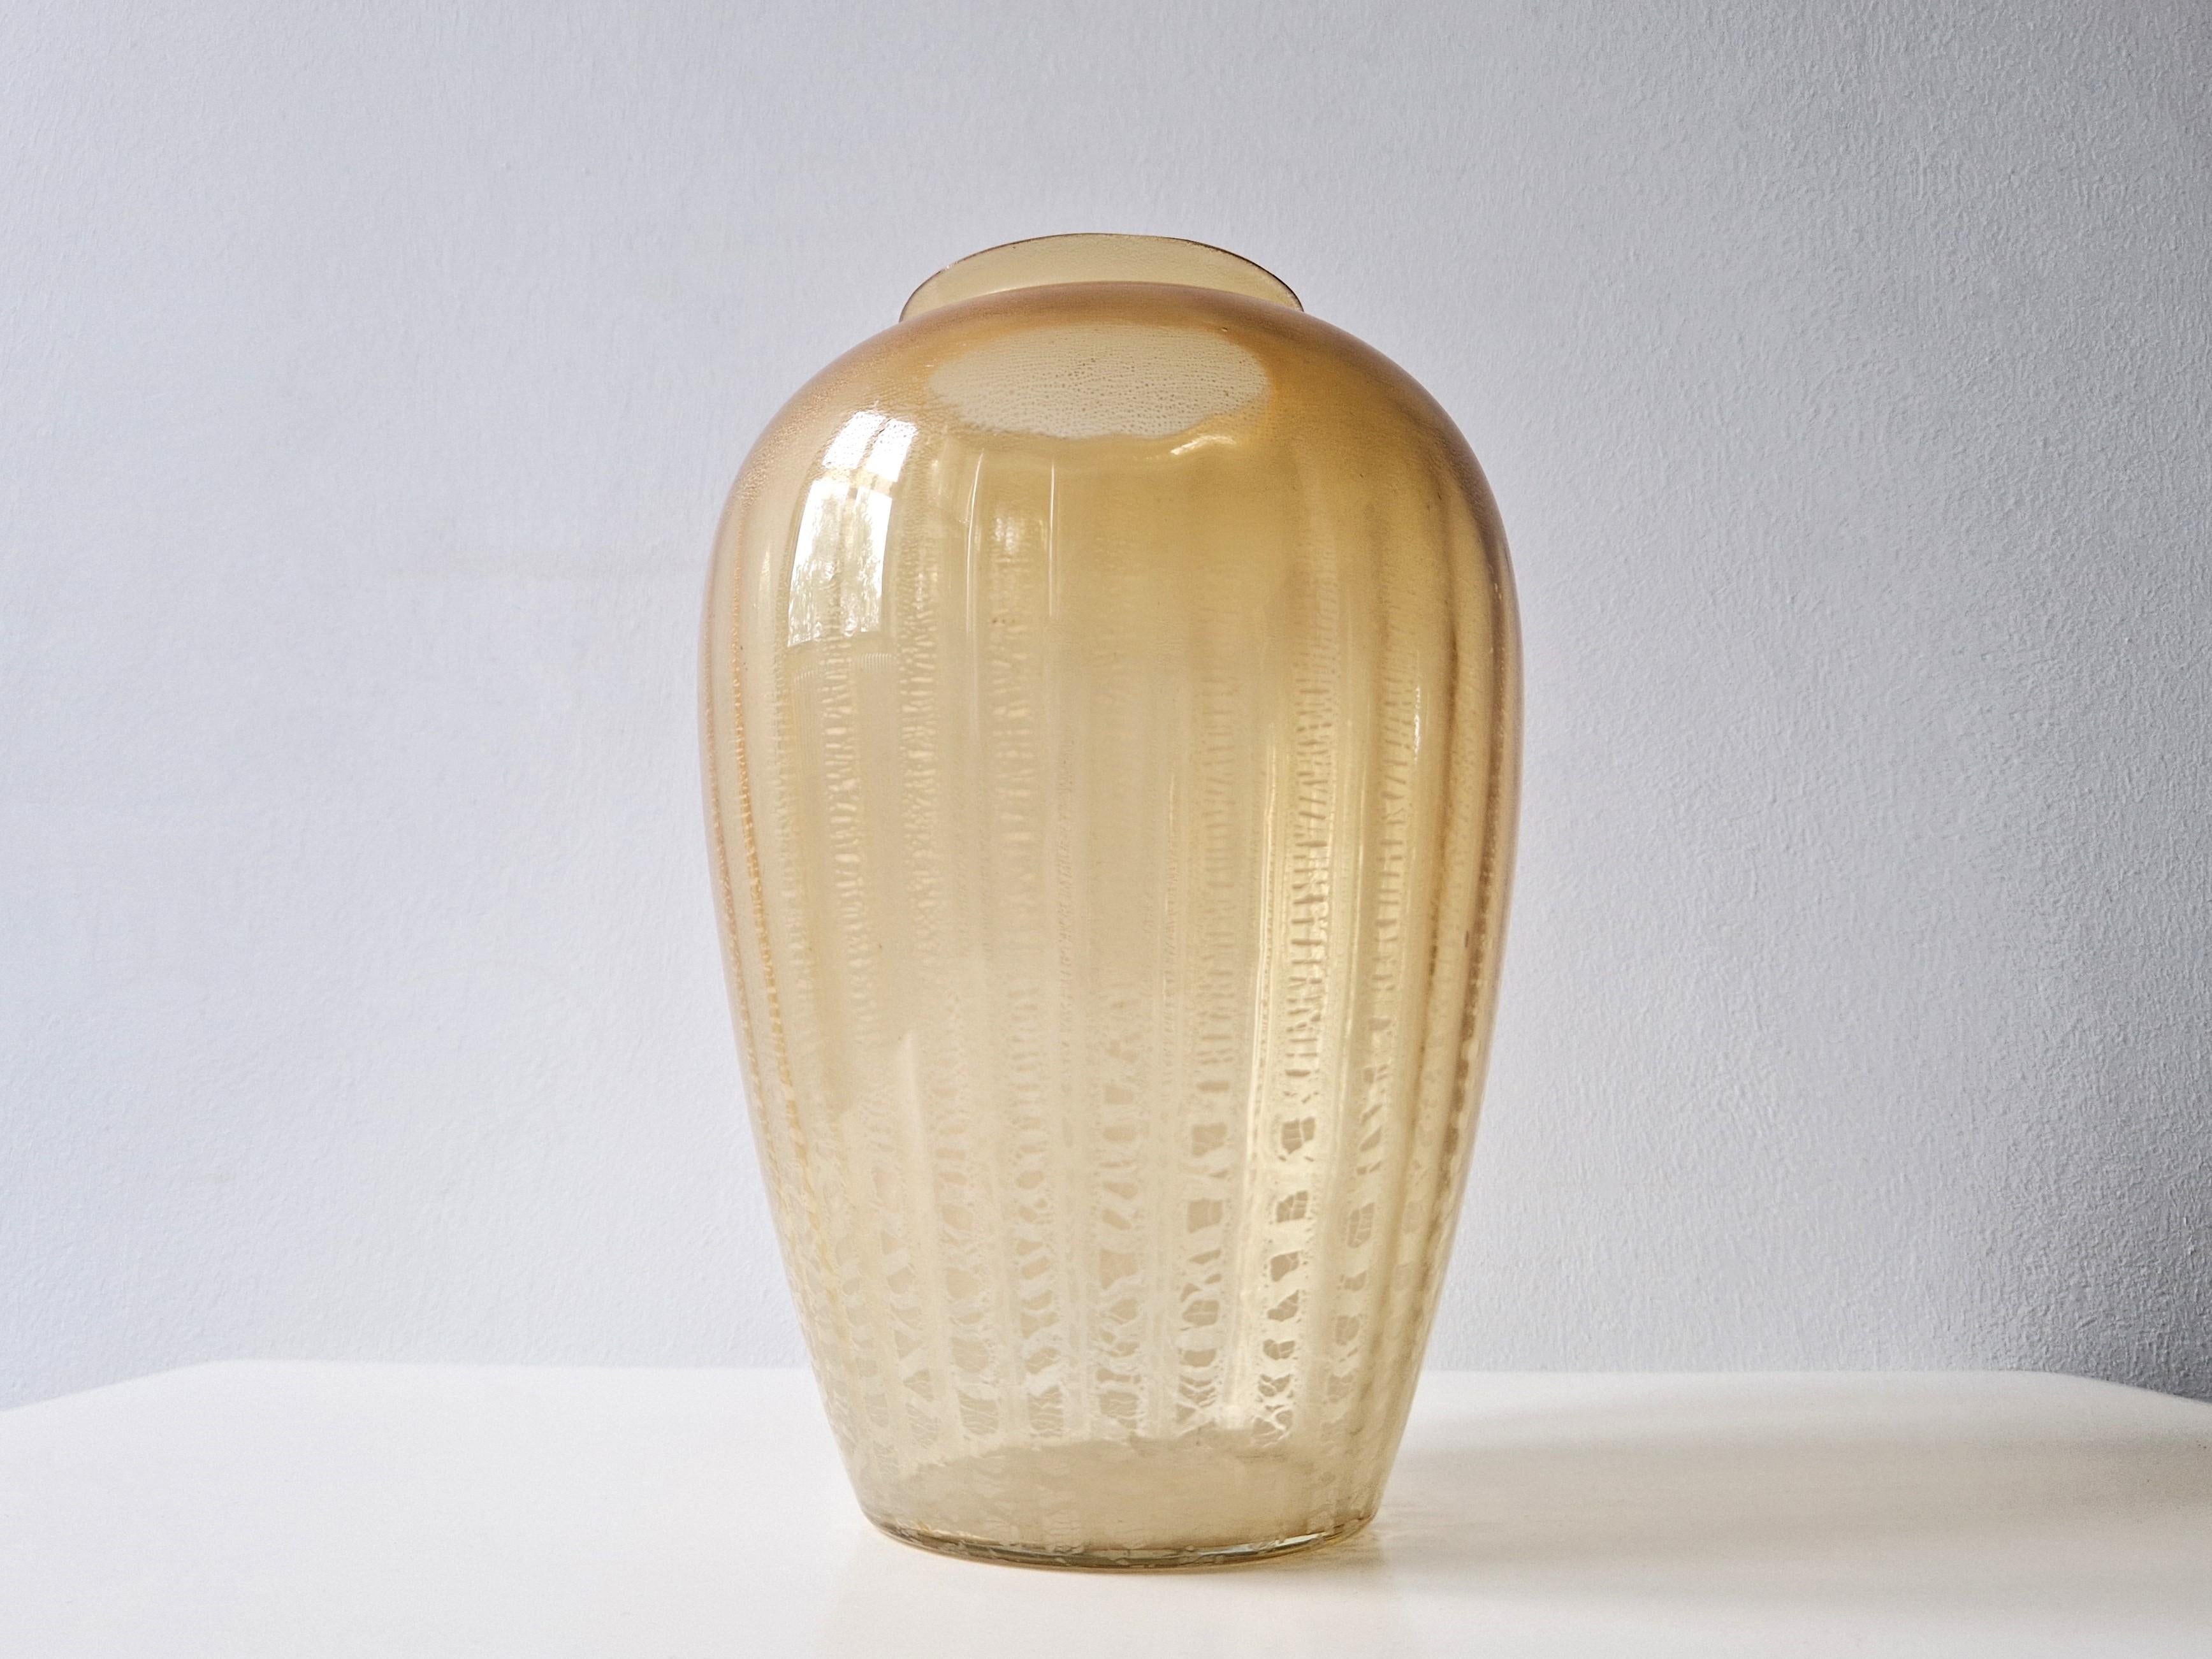 The 'Sonoor' vase, model VS0154, was designed by Andries Dirk Copier for the Leerdam glass factory in The Netherlands in 1938. The Sonoor series, with crackled glass, were the first developed vases by Copier. He was inspired to make these vases